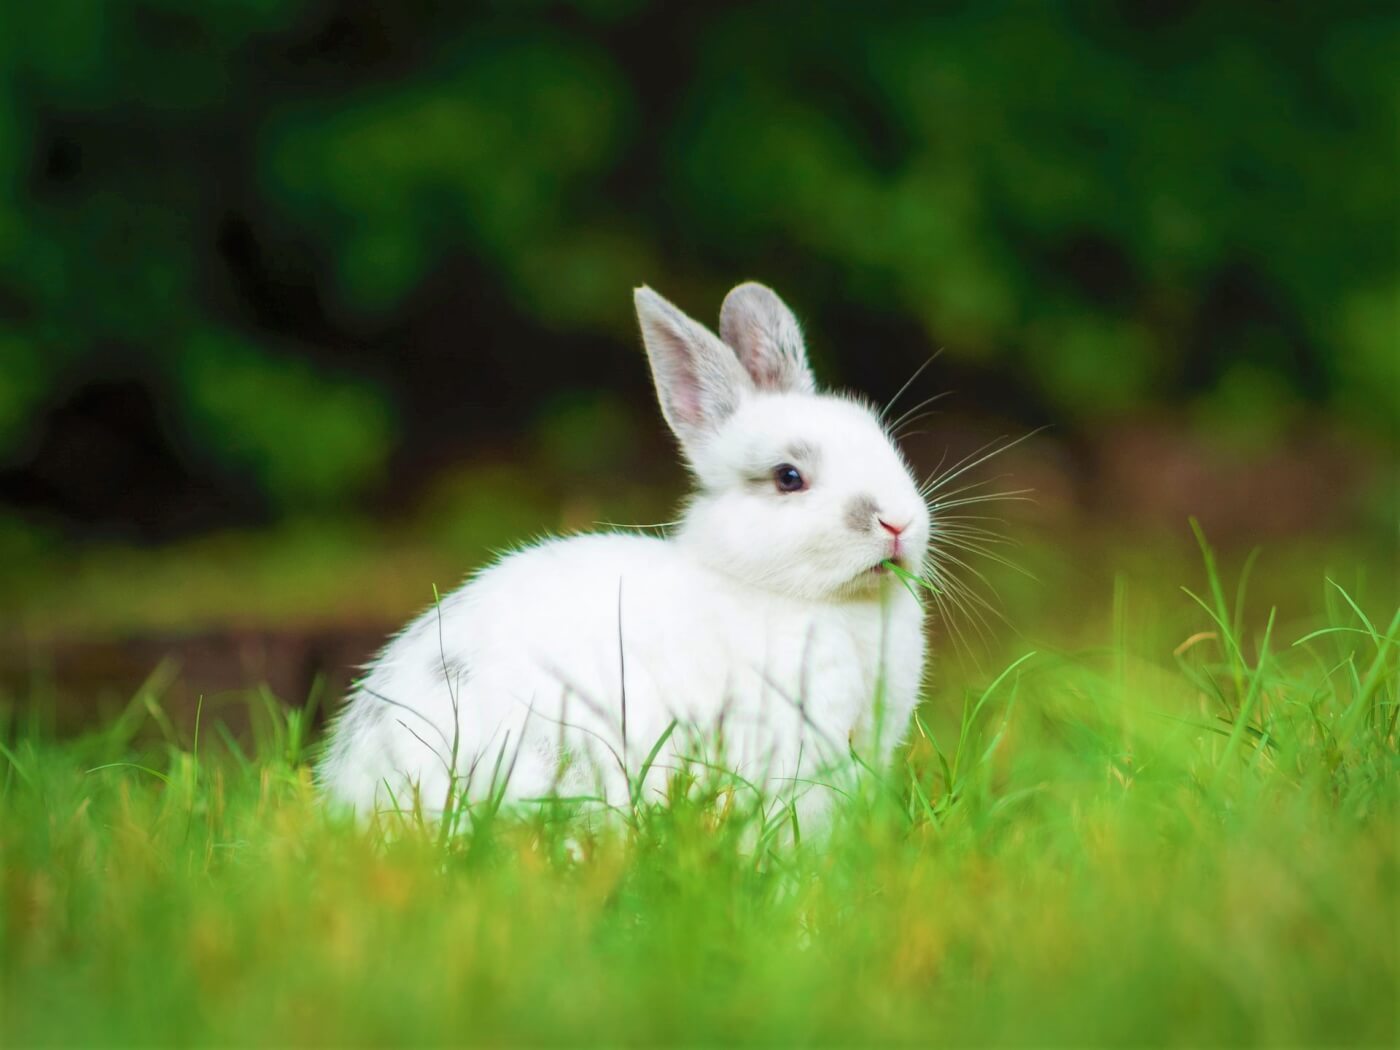 white rabbit with gray markings Learn How Bunnies Are Suffering This Easter